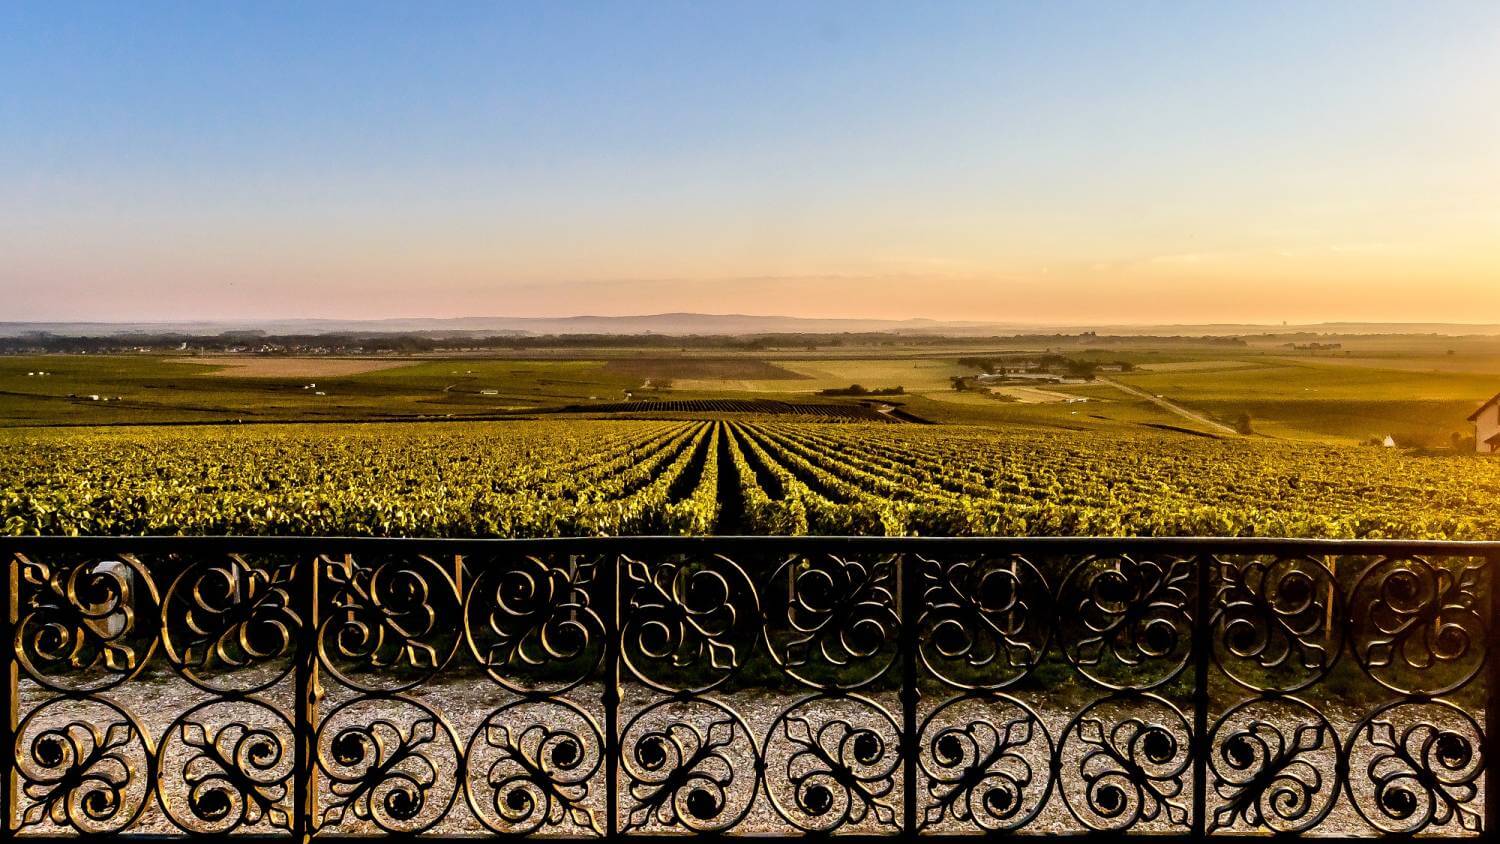 View of the Veuve Clicquot vineyard of Verzy in the morning